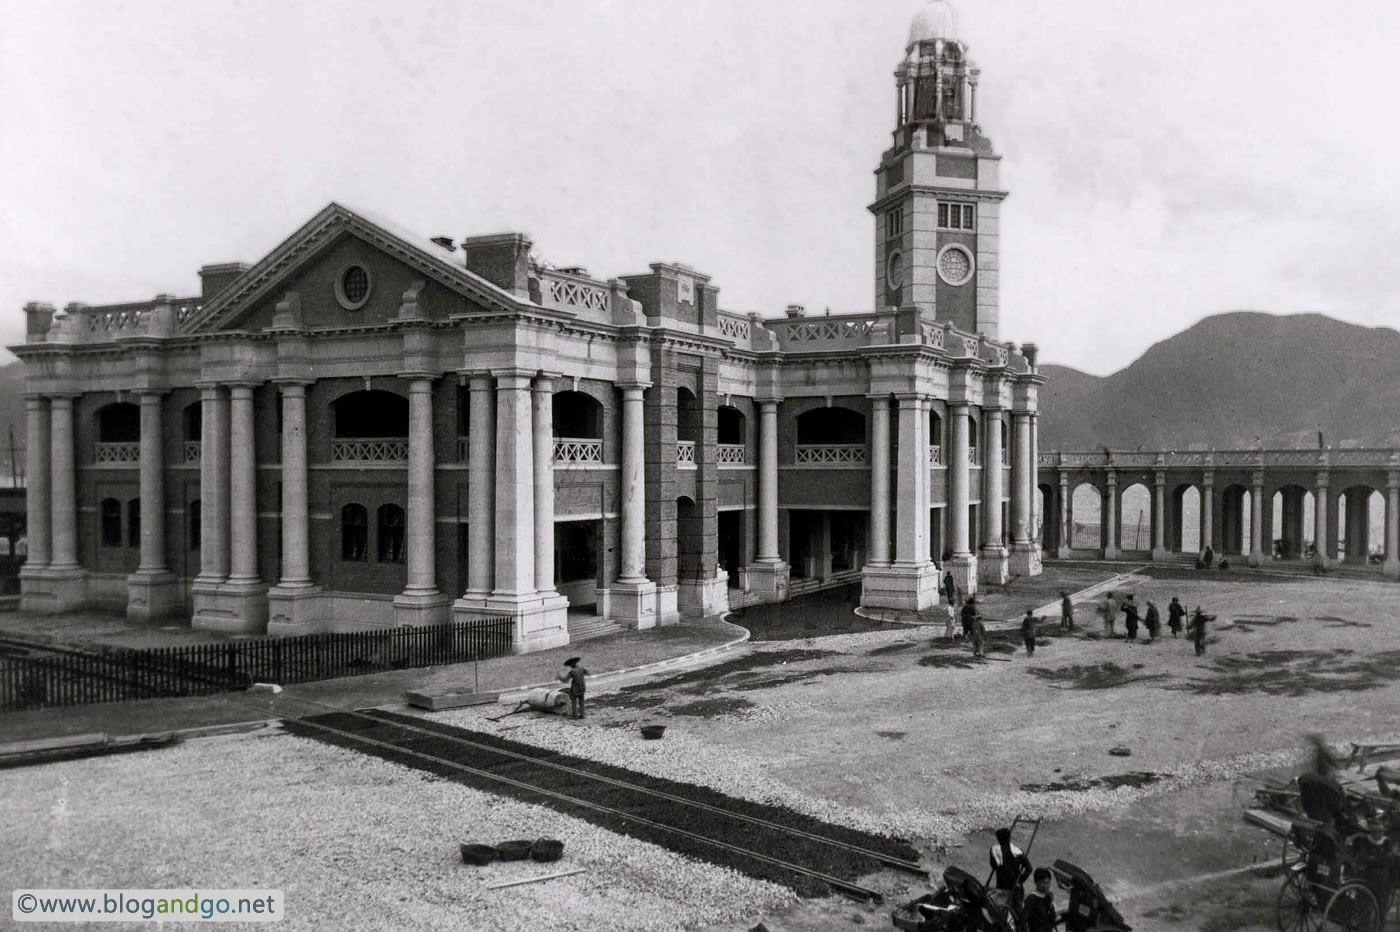 Kowloon station and the Clock Tower in 1914